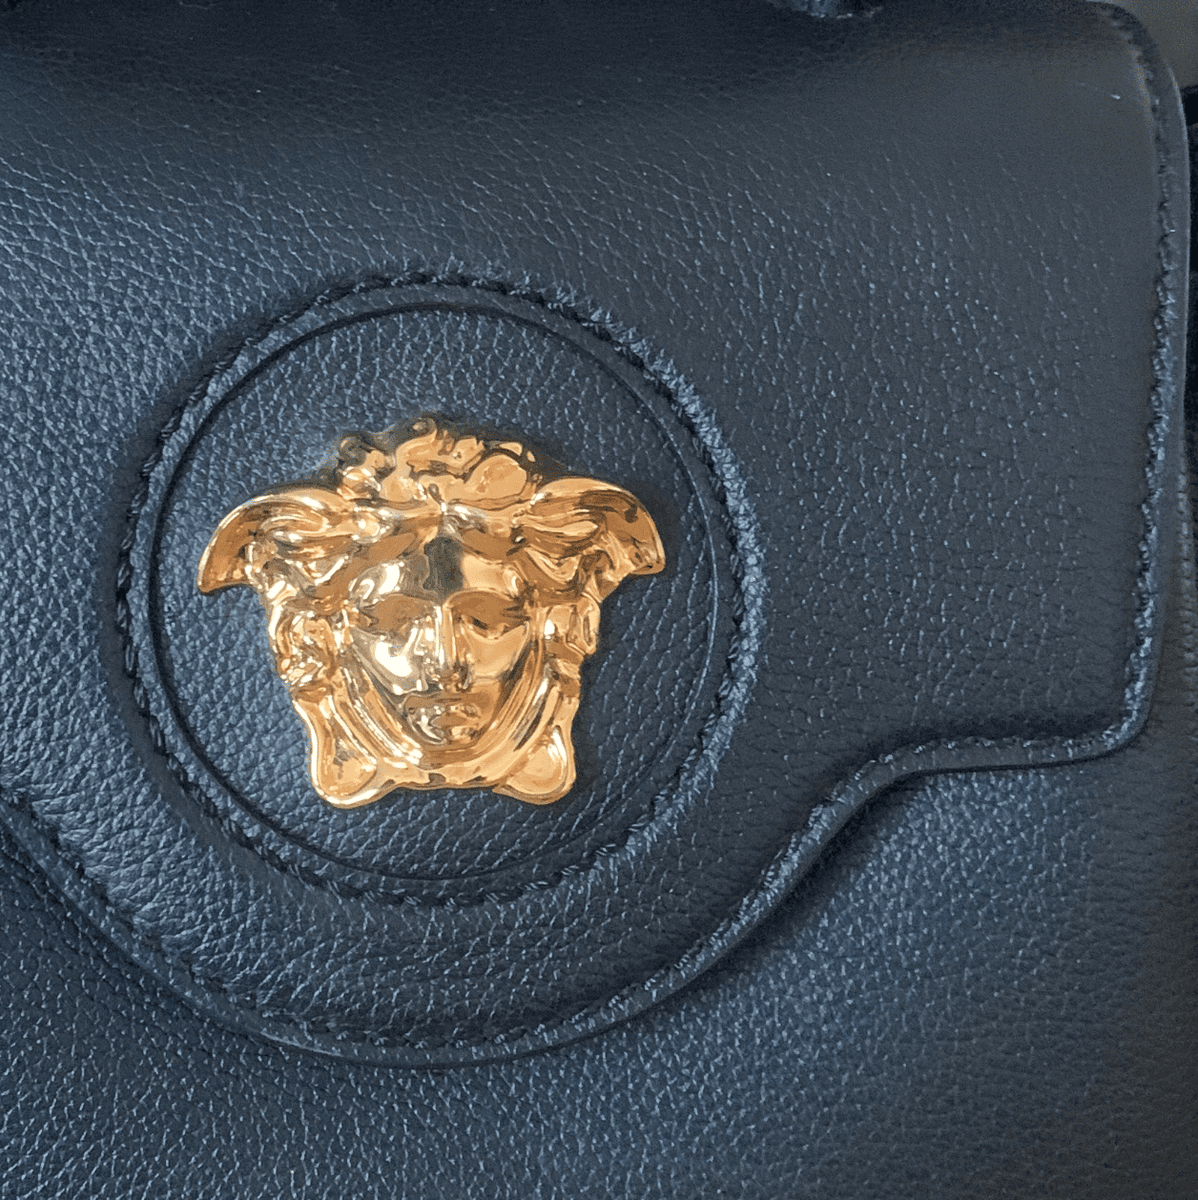 How to Tell if a Versace Purse is Real – LegitGrails